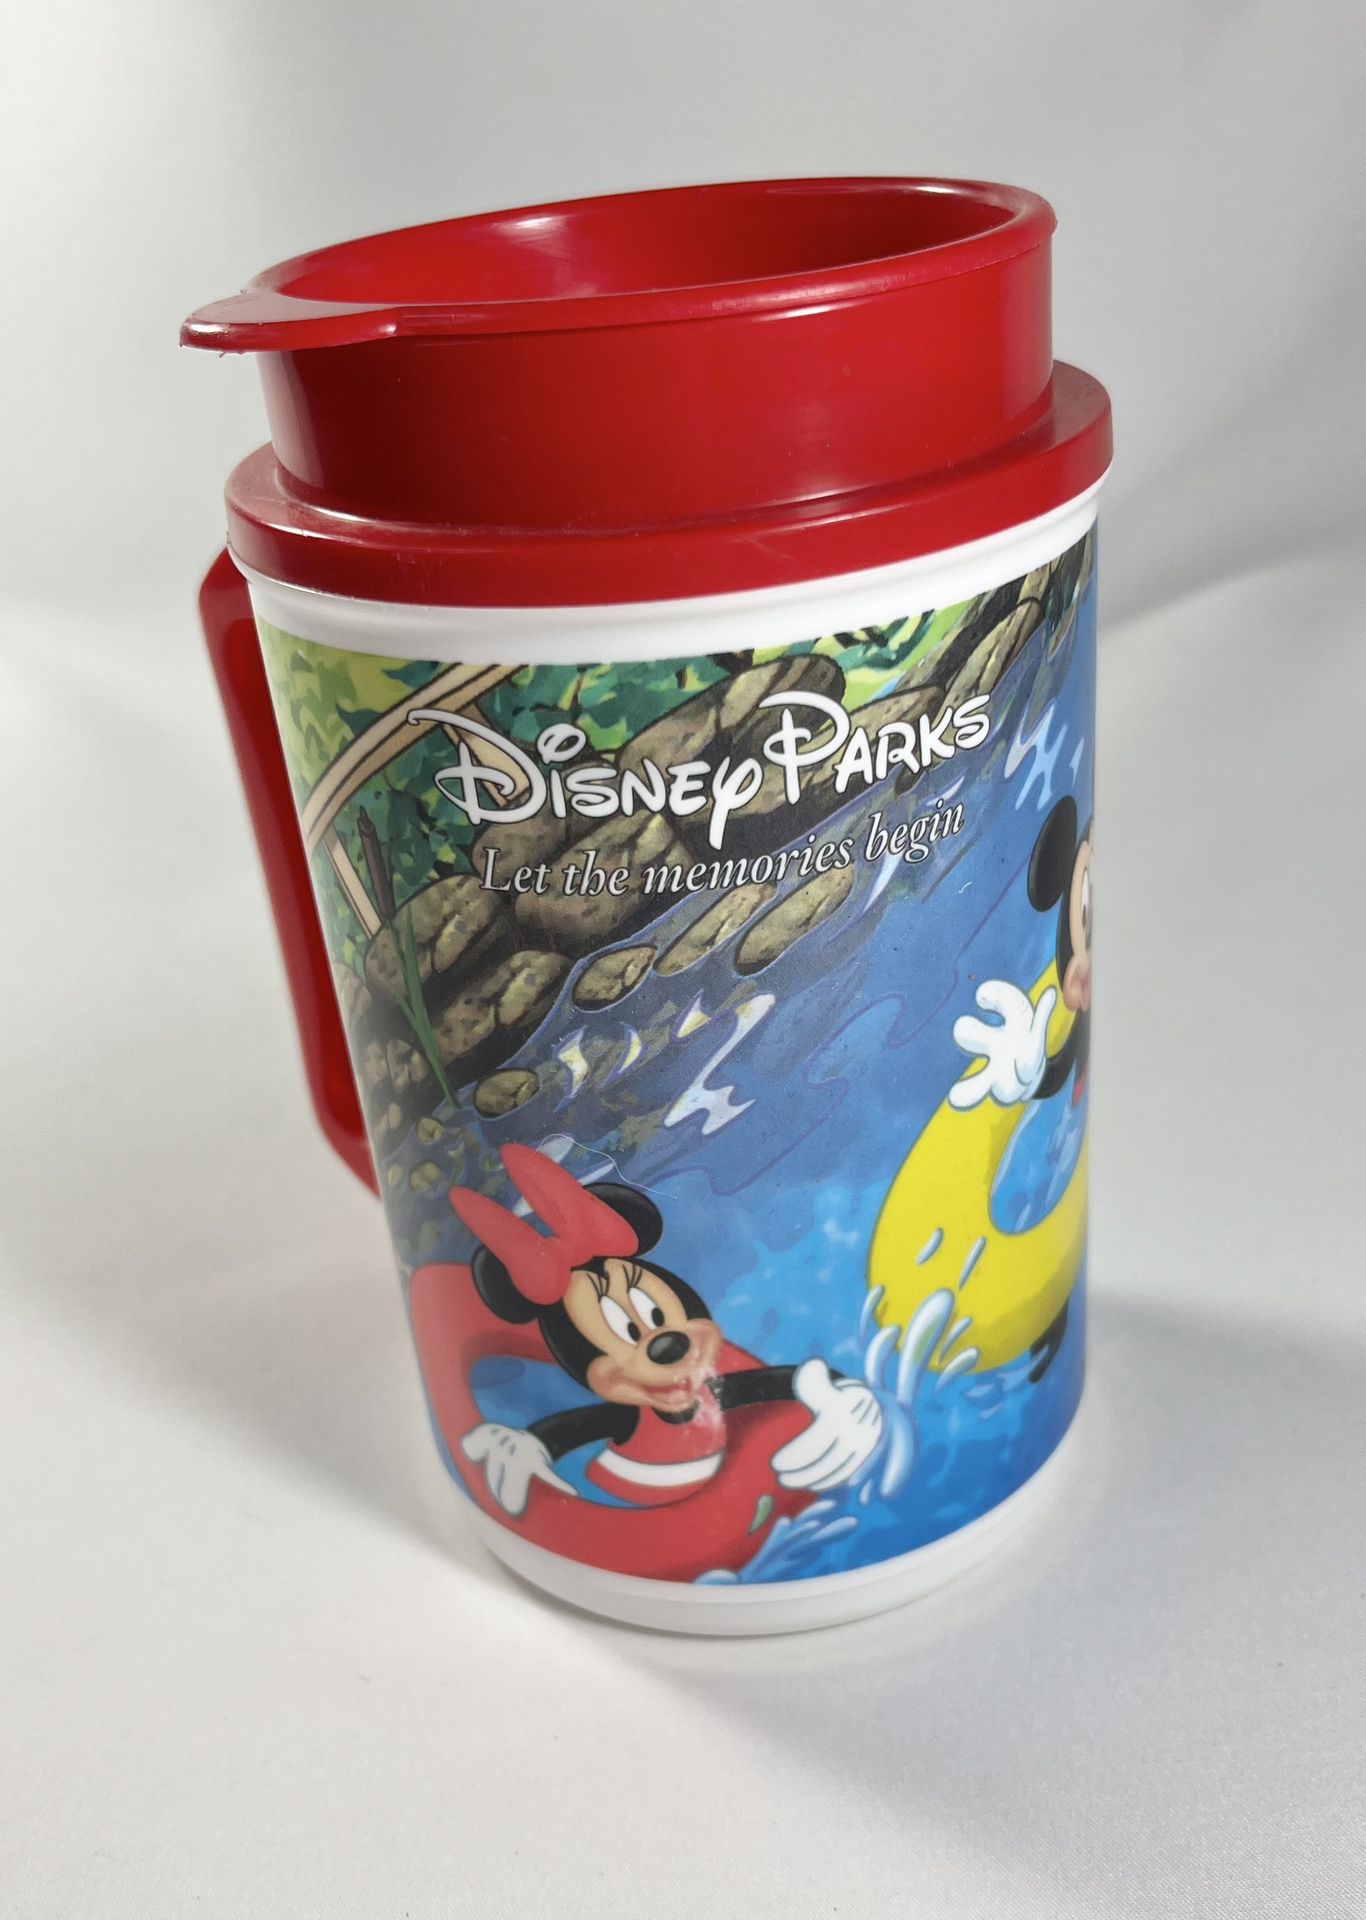 Disney Park 20oz WHIRLEY Insulated Cup Mickey Minnie Goofy DONALD Pluto ChipDale